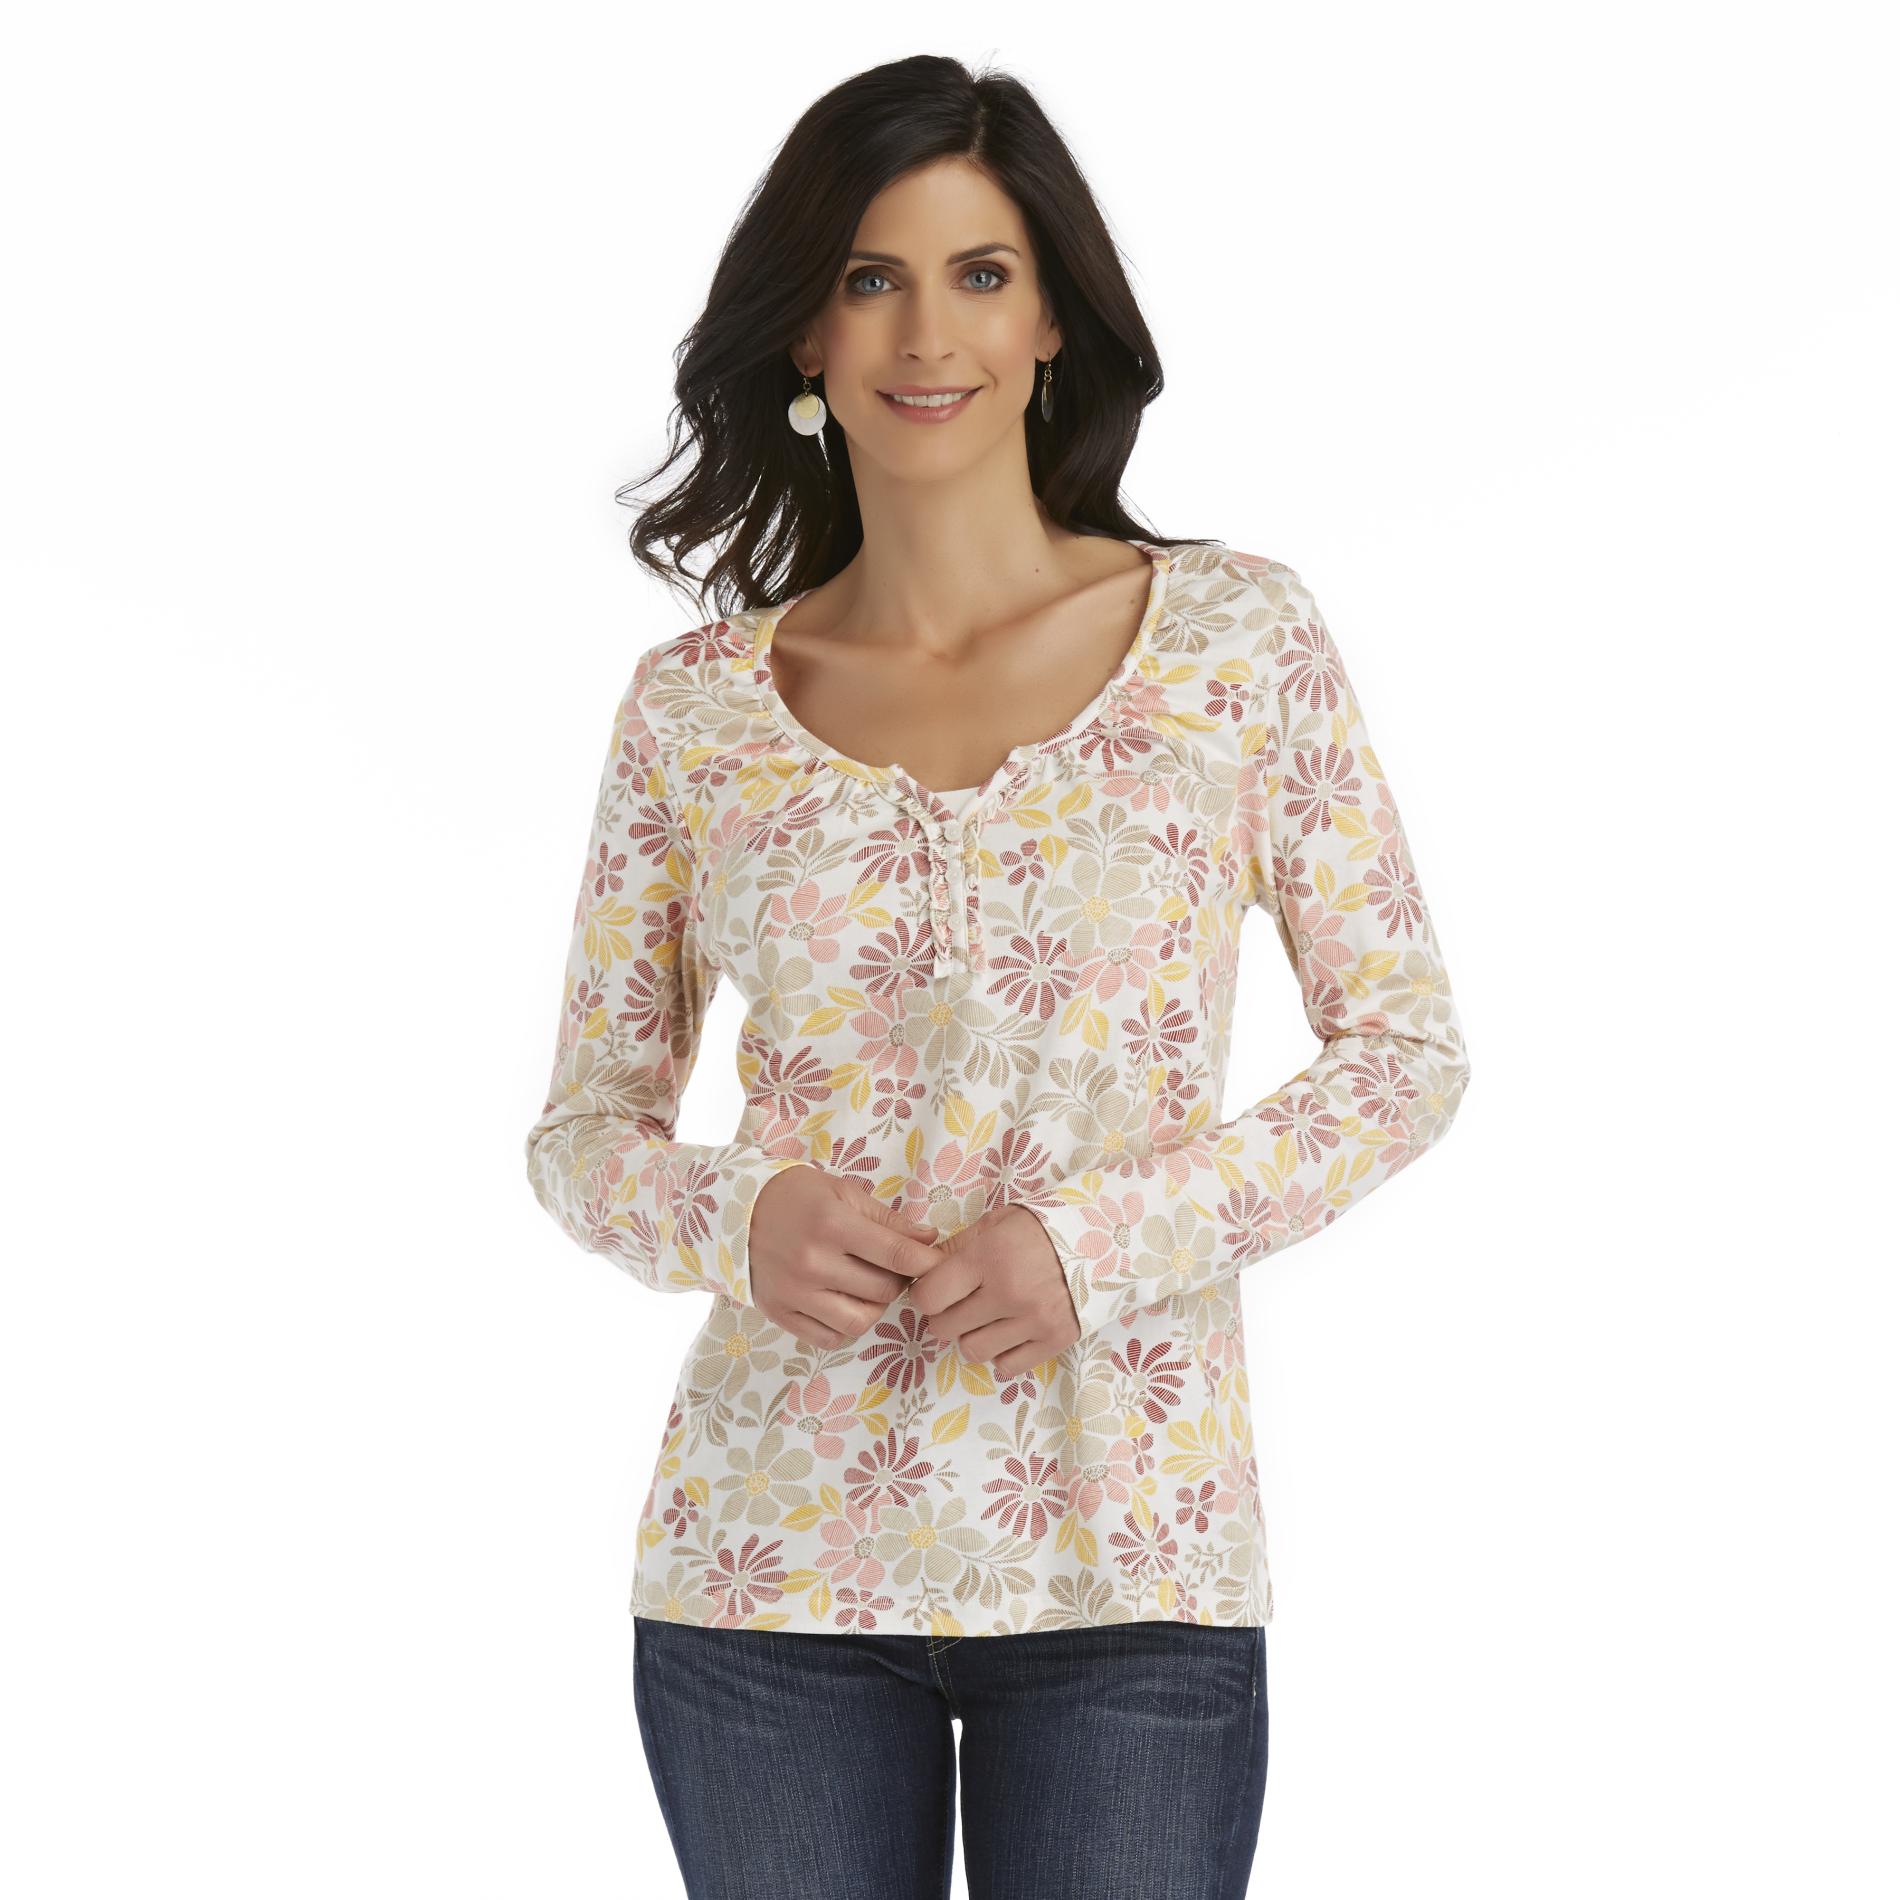 Basic Editions Women's Long-Sleeve Henley Top - Floral